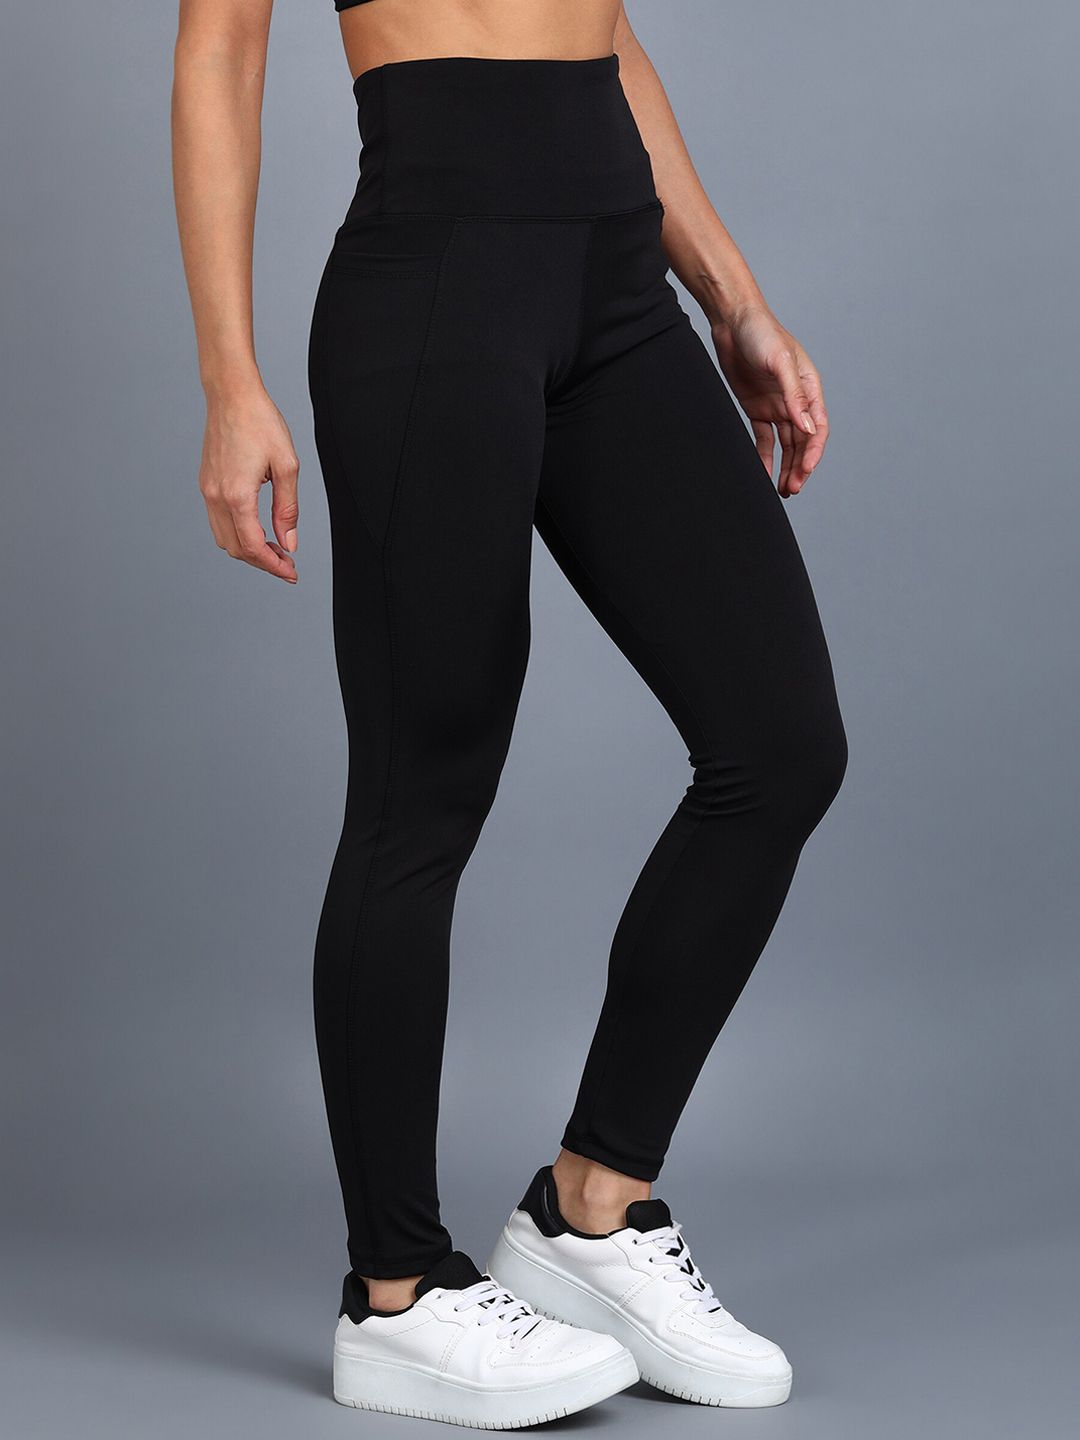 Rock Paper Scissors Women Black Solid Ankle Length Training Tights Price in India